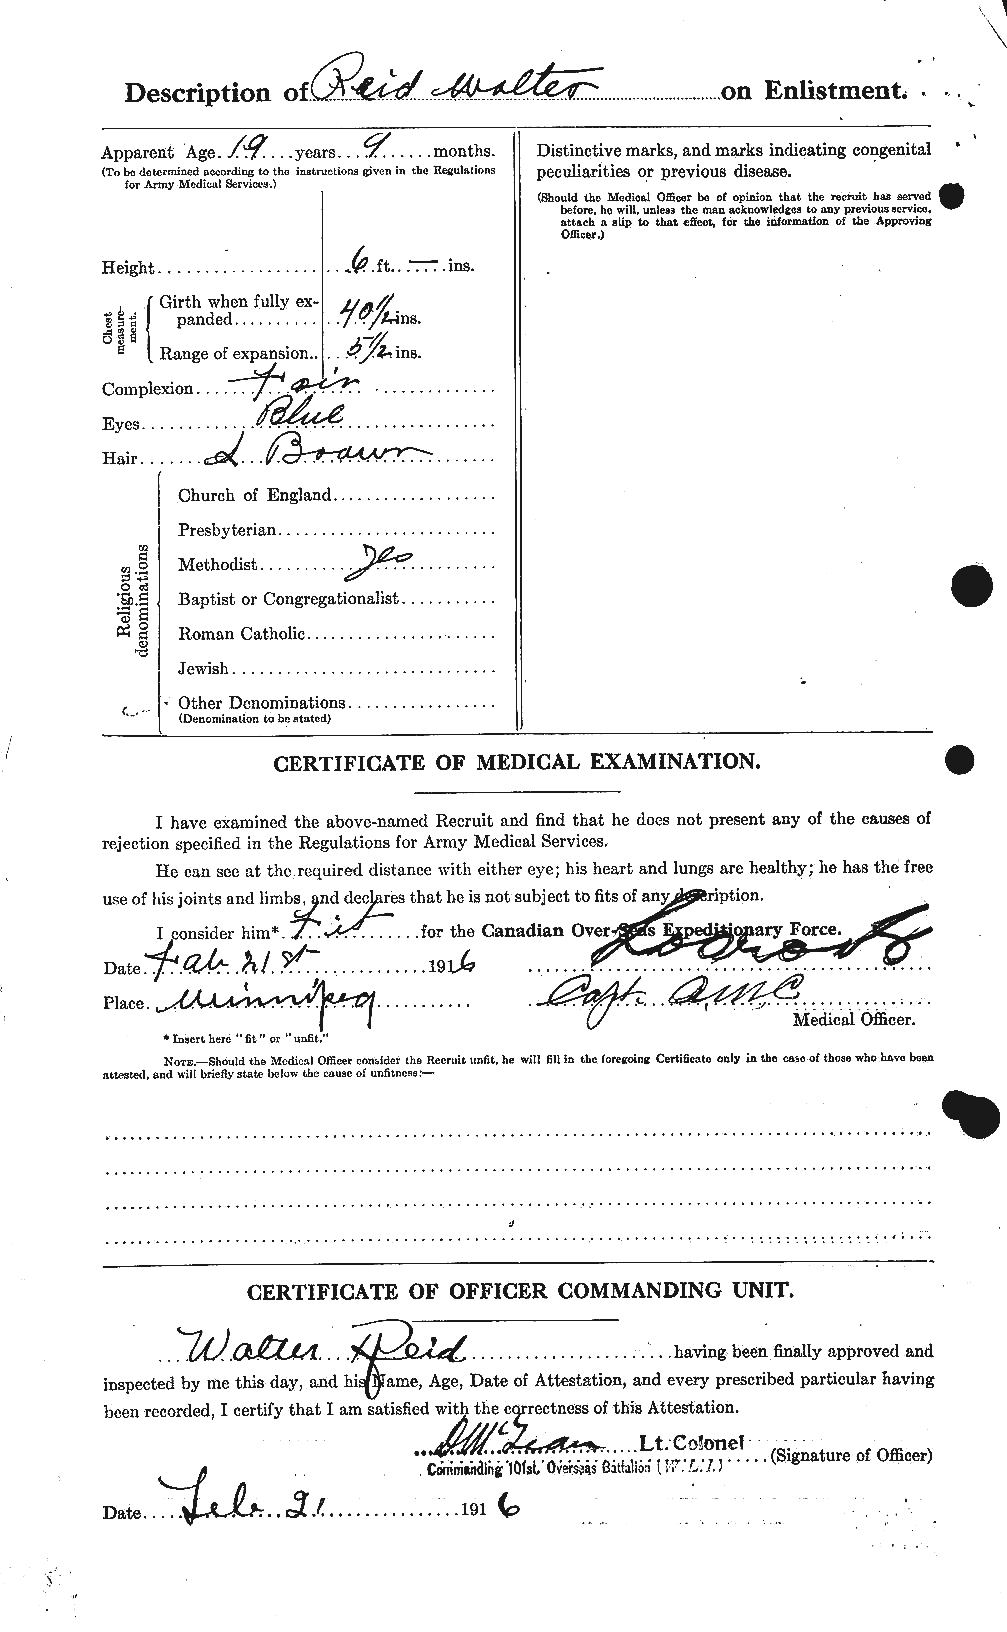 Personnel Records of the First World War - CEF 596885b